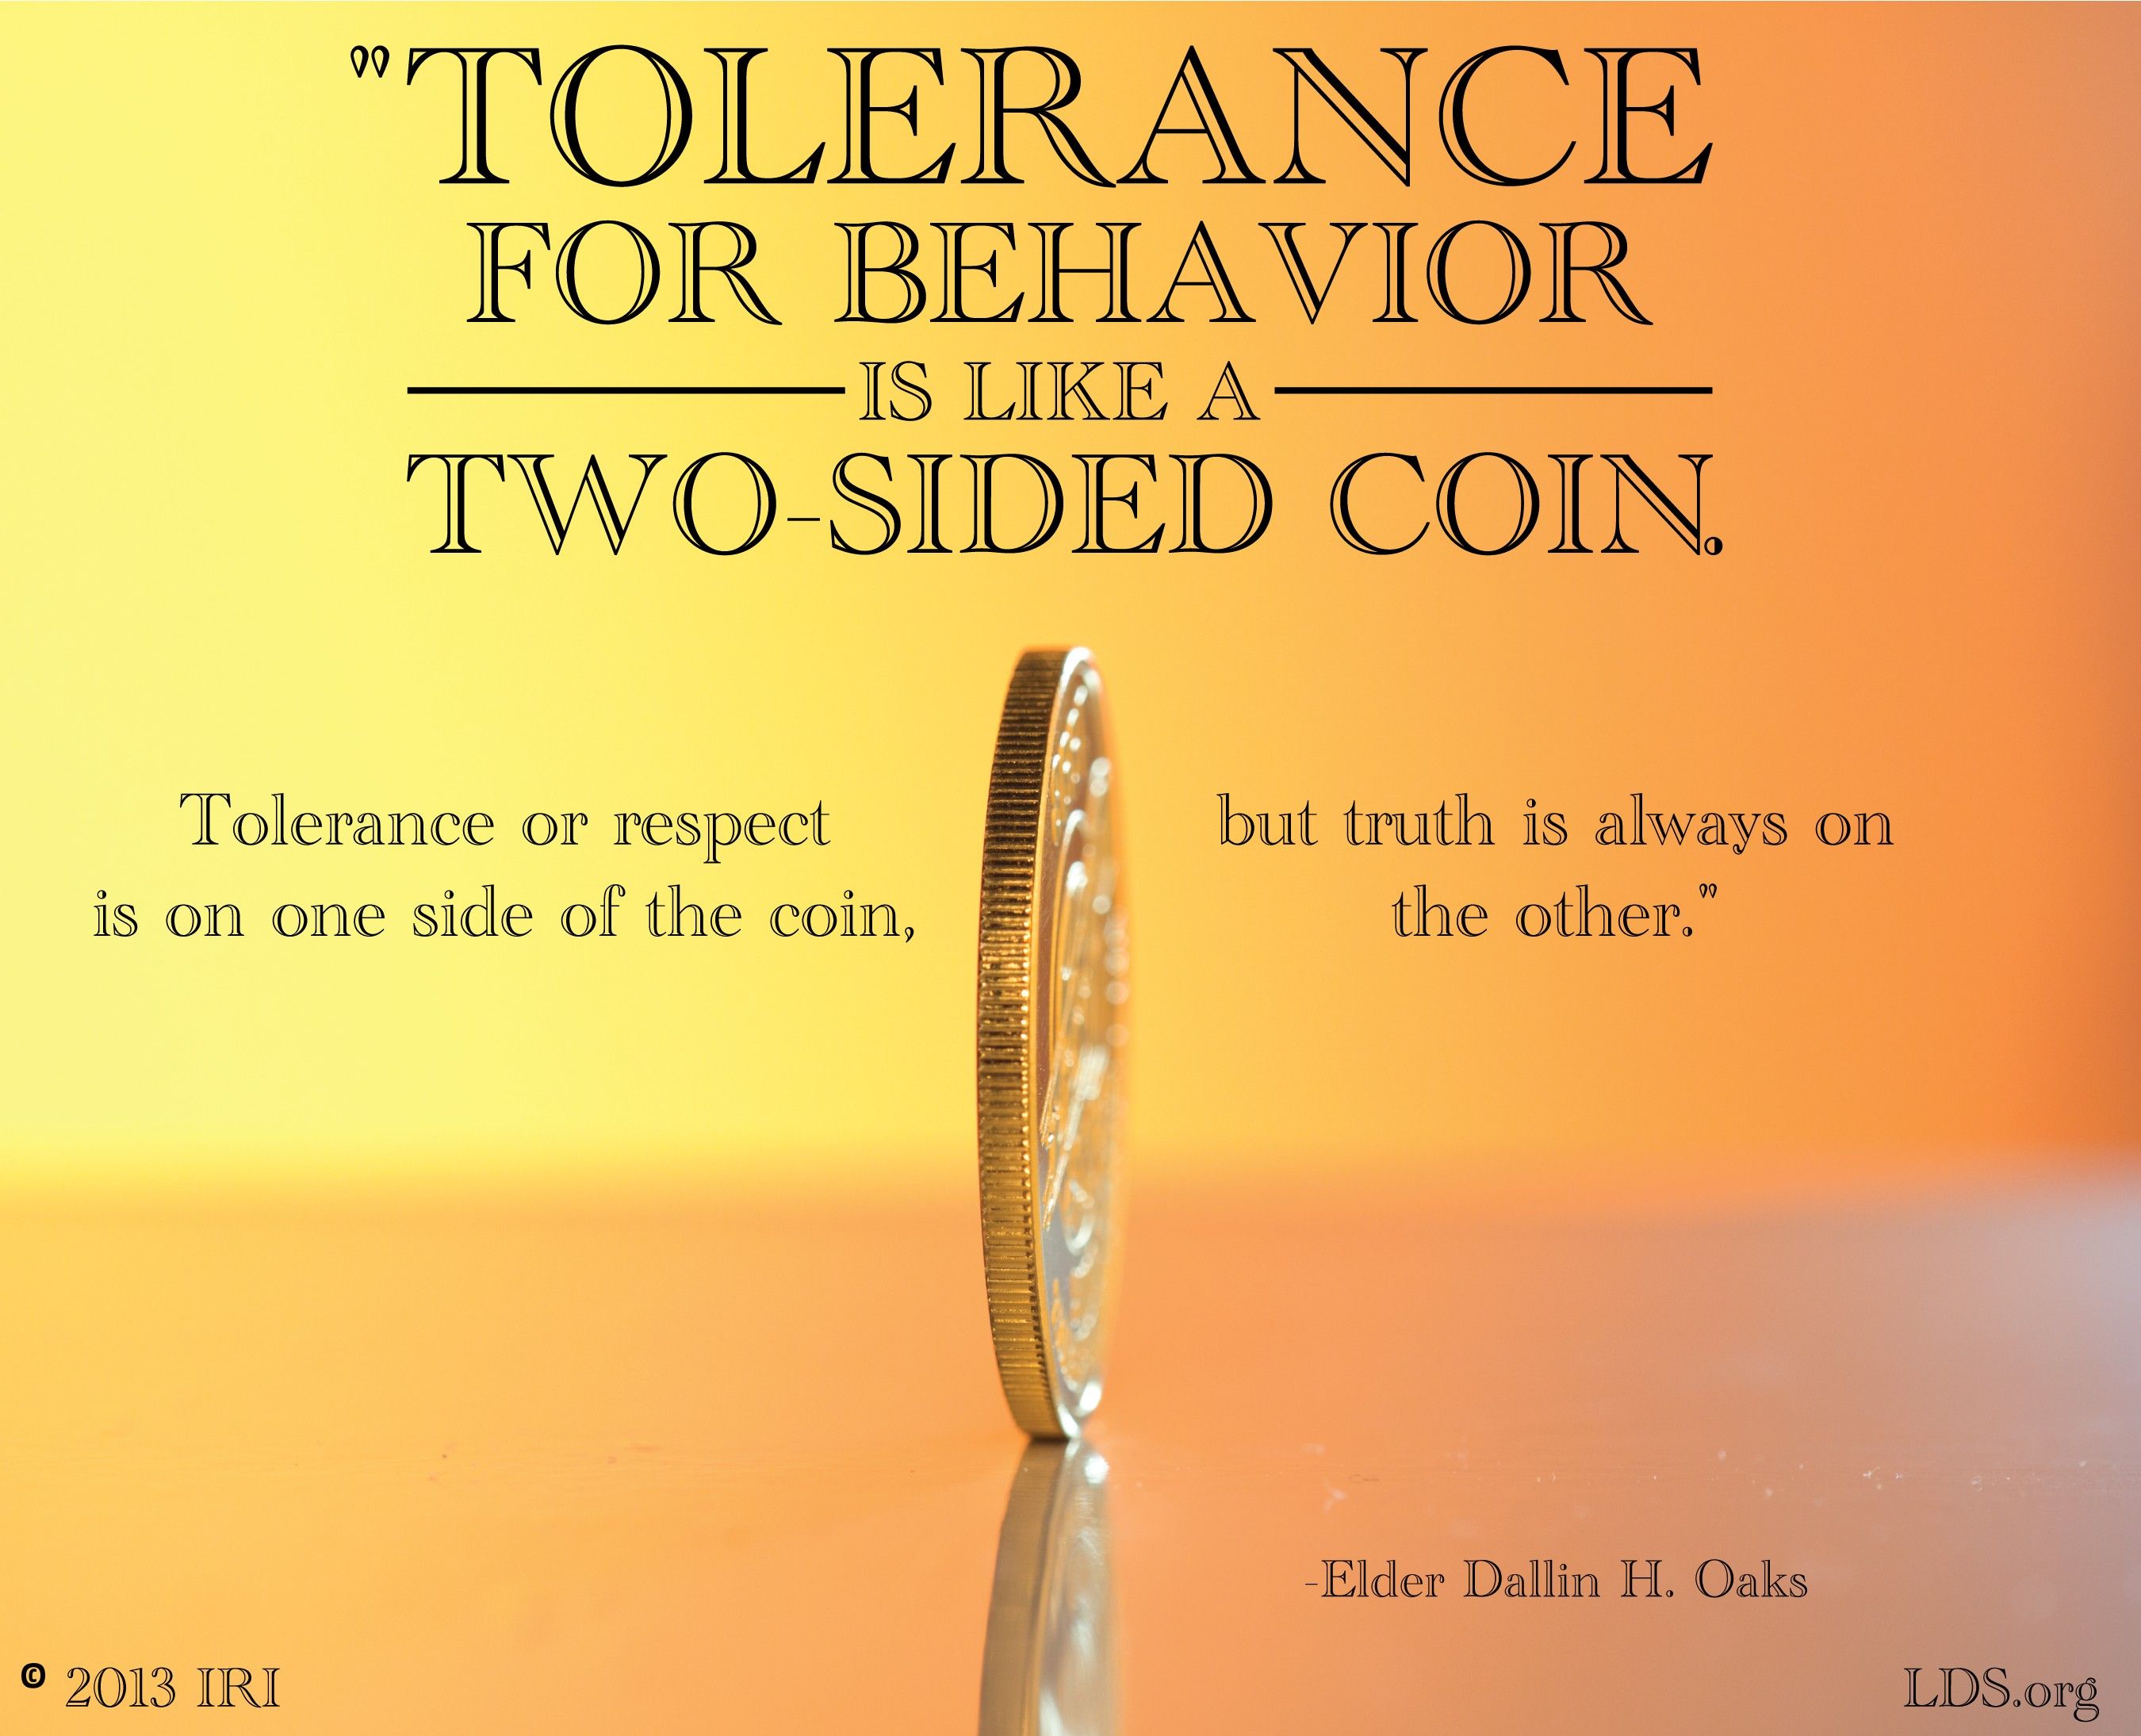 “Tolerance for behavior is like a two-sided coin. Tolerance or respect is on one side of the coin, but truth is always on the other.”—Elder Dallin H. Oaks, “Truth and Tolerance” © undefined ipCode 1.